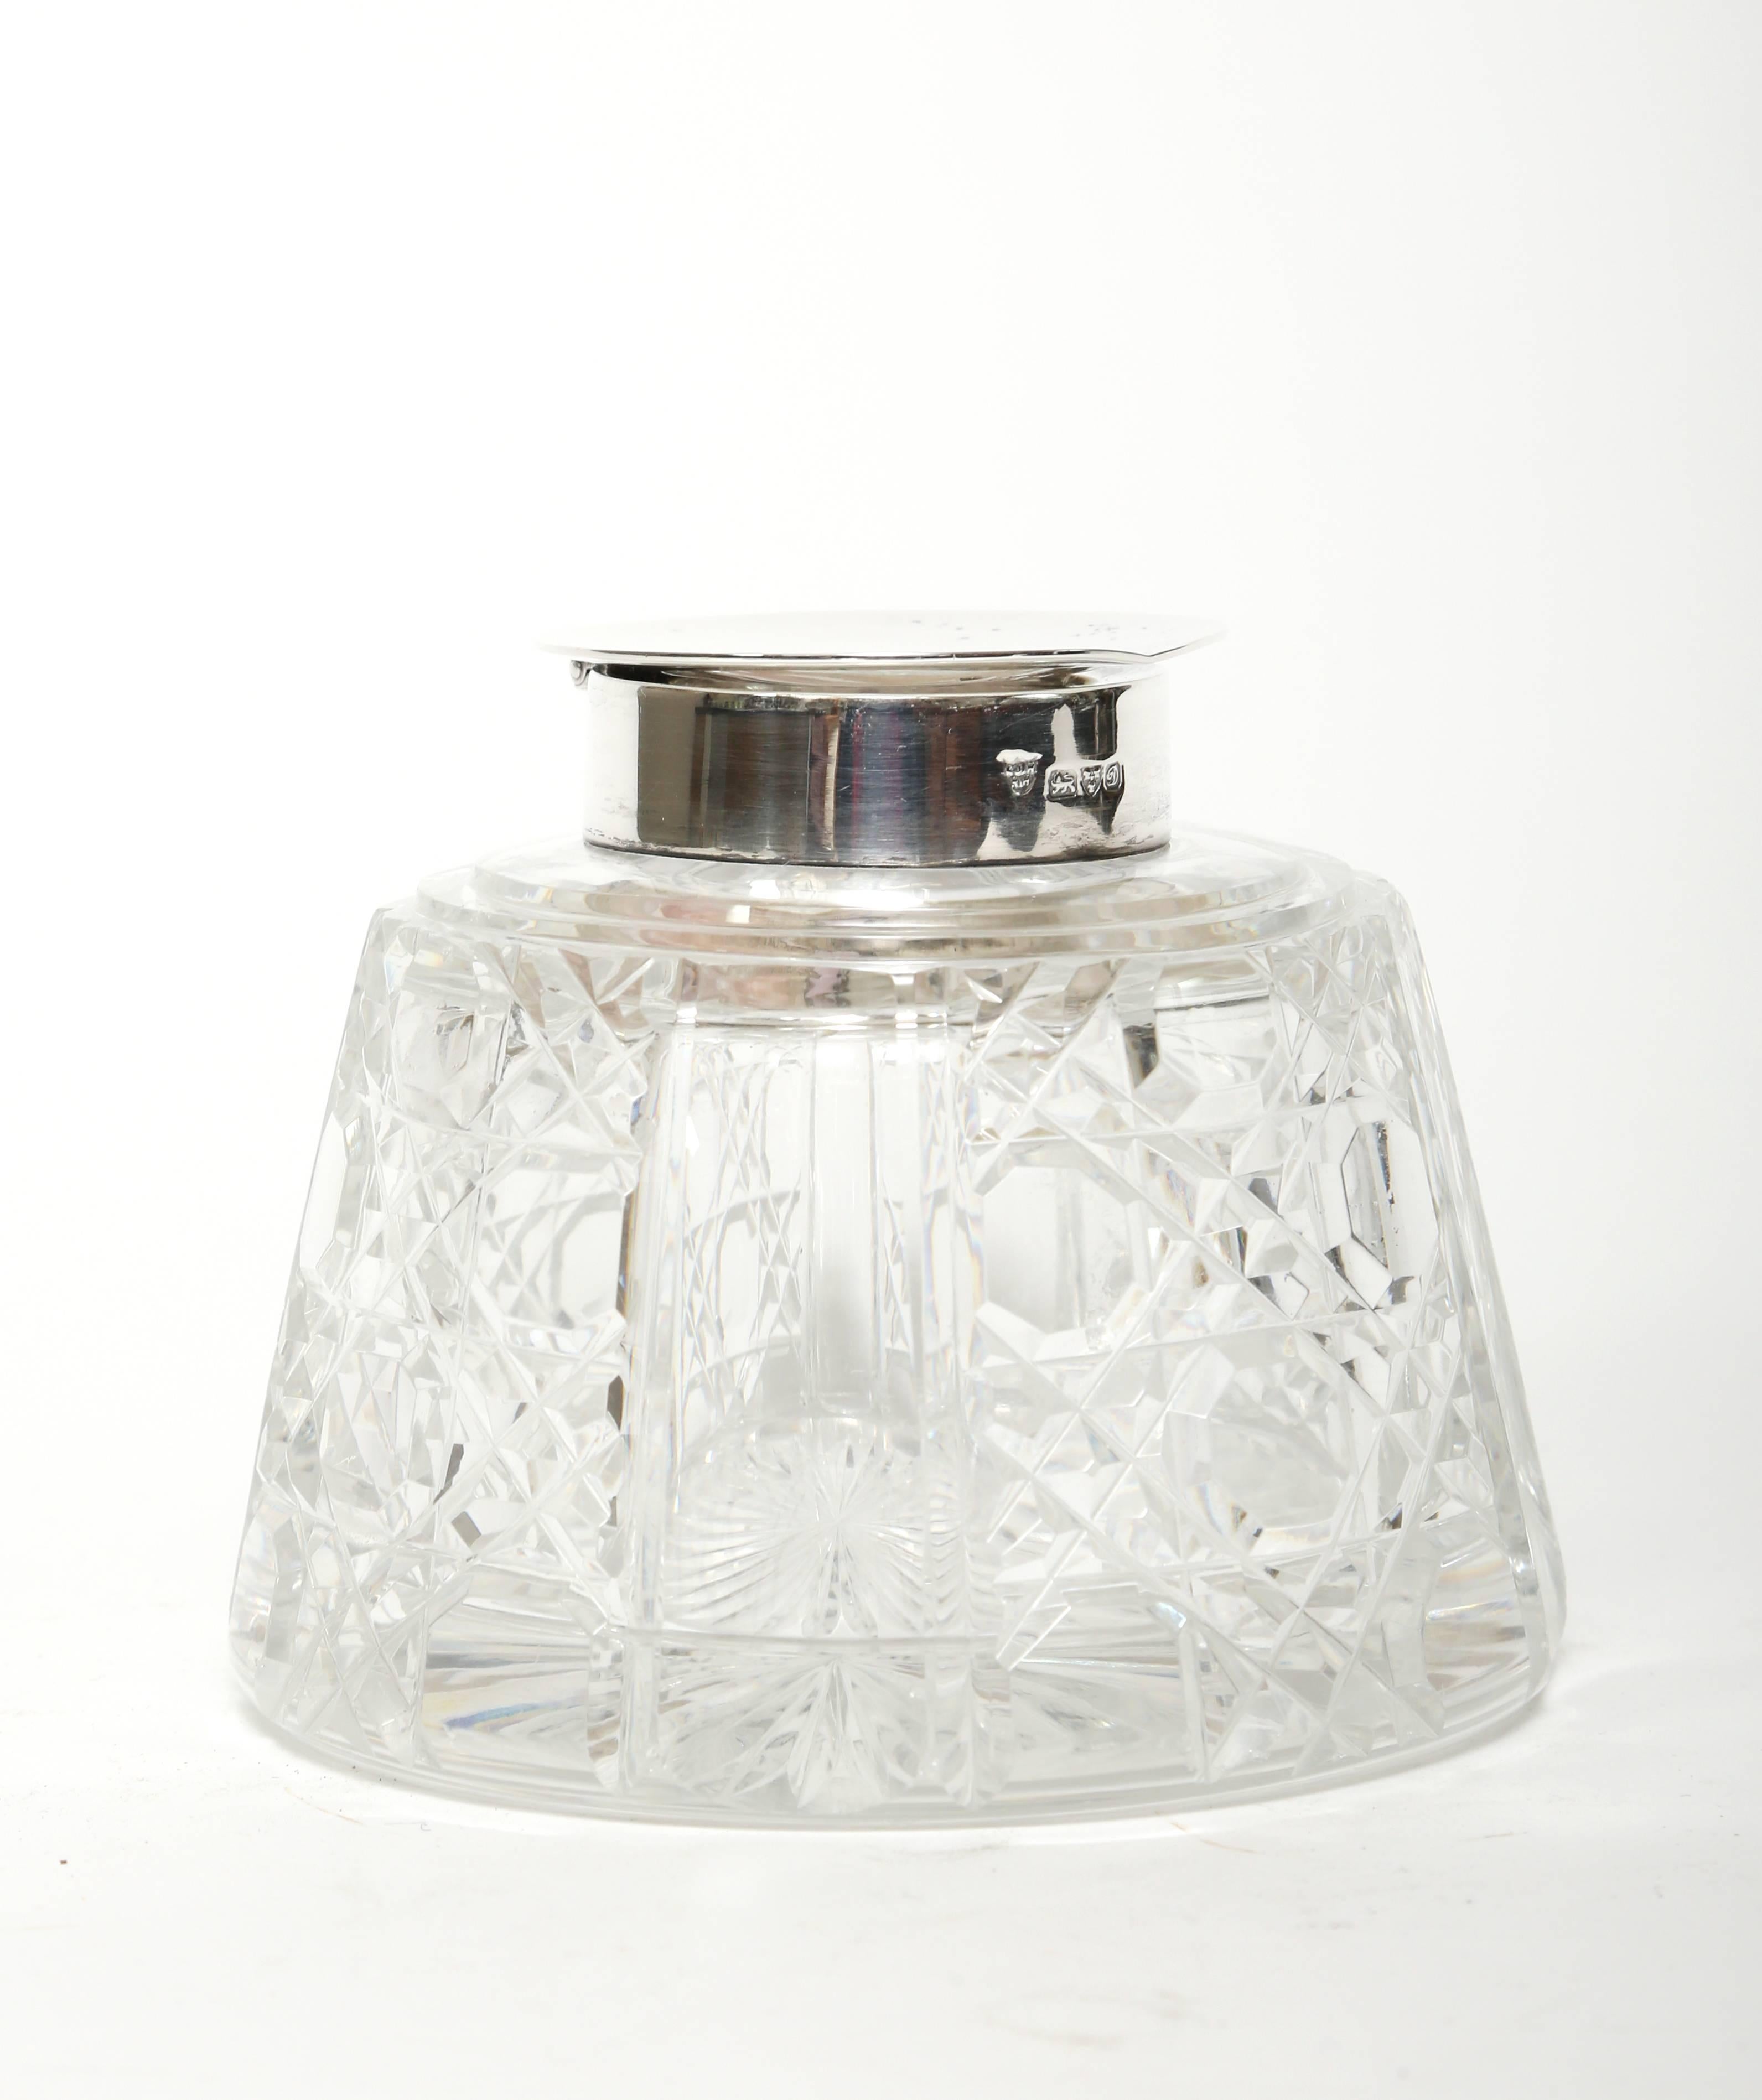 Large Edward VII period cane cut crystal inkwell with sterling silver hallmarked top and star cut base. The hallmarks on the collar are from Chester, England 1904.

(This item is eligible for a gift box)